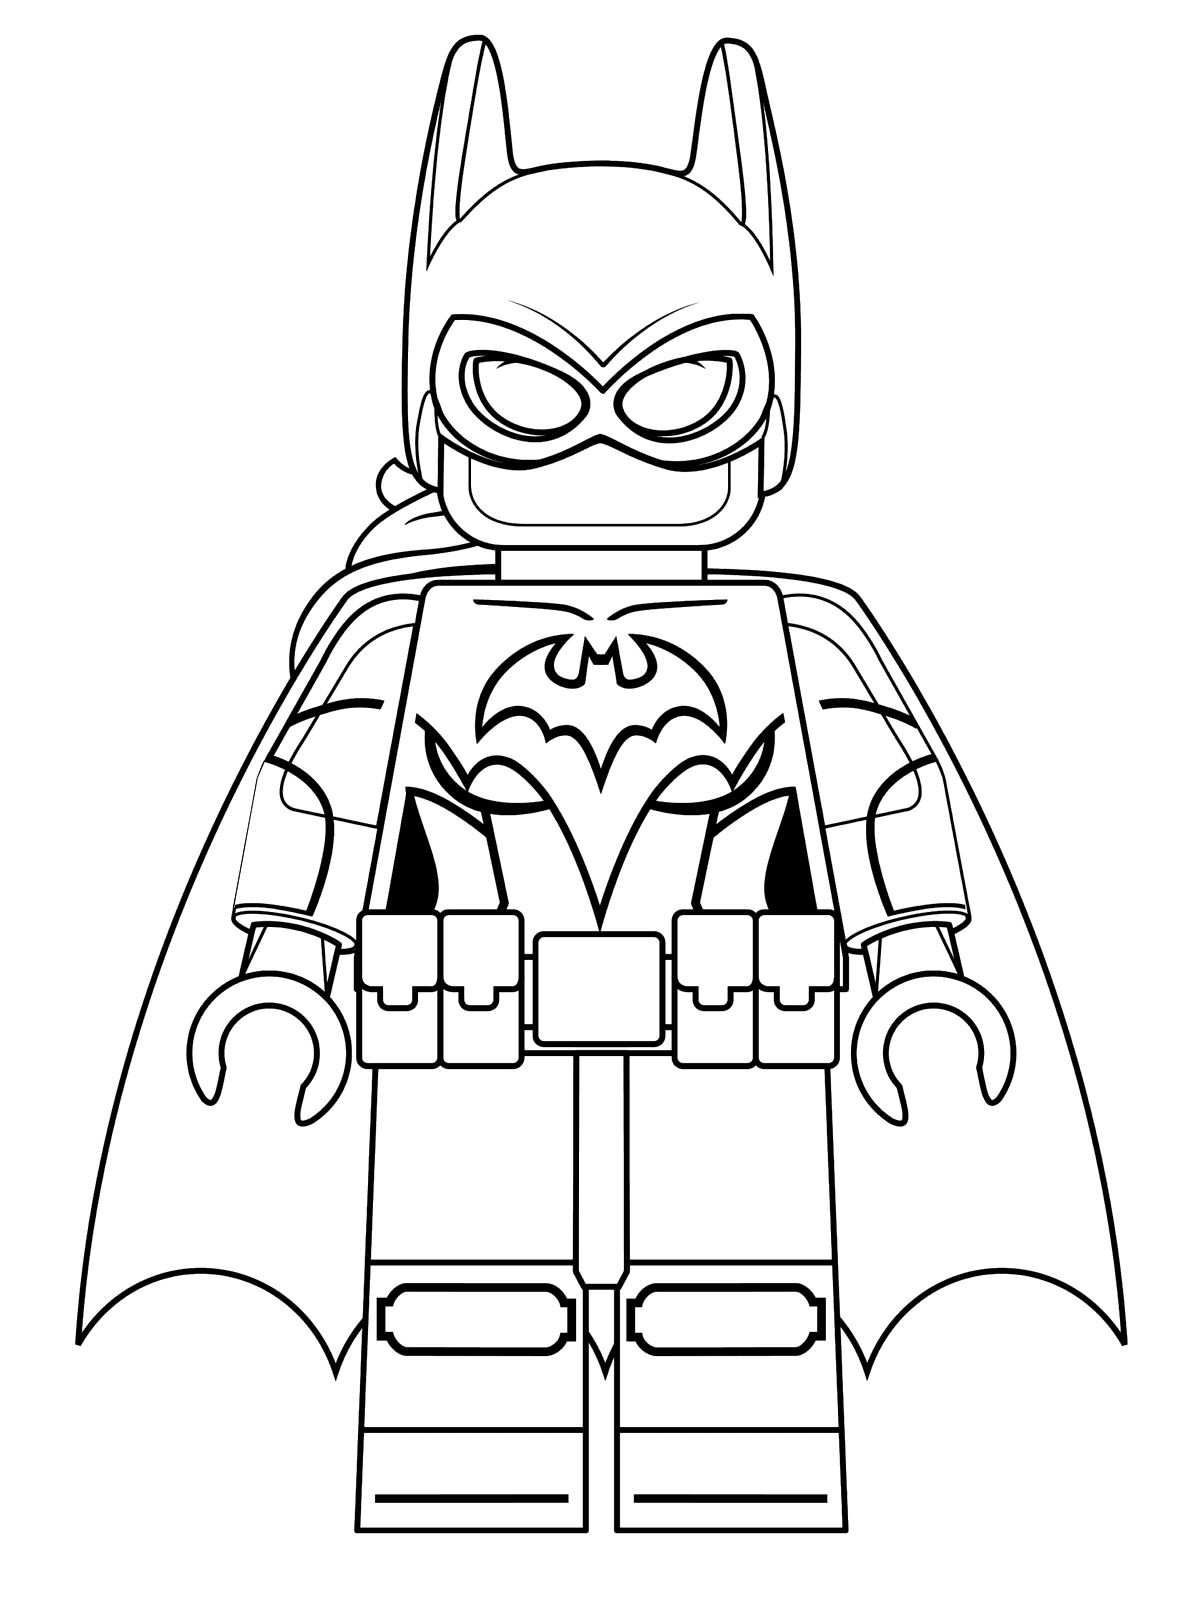 lego-batman-coloring-pages-best-coloring-pages-for-kids